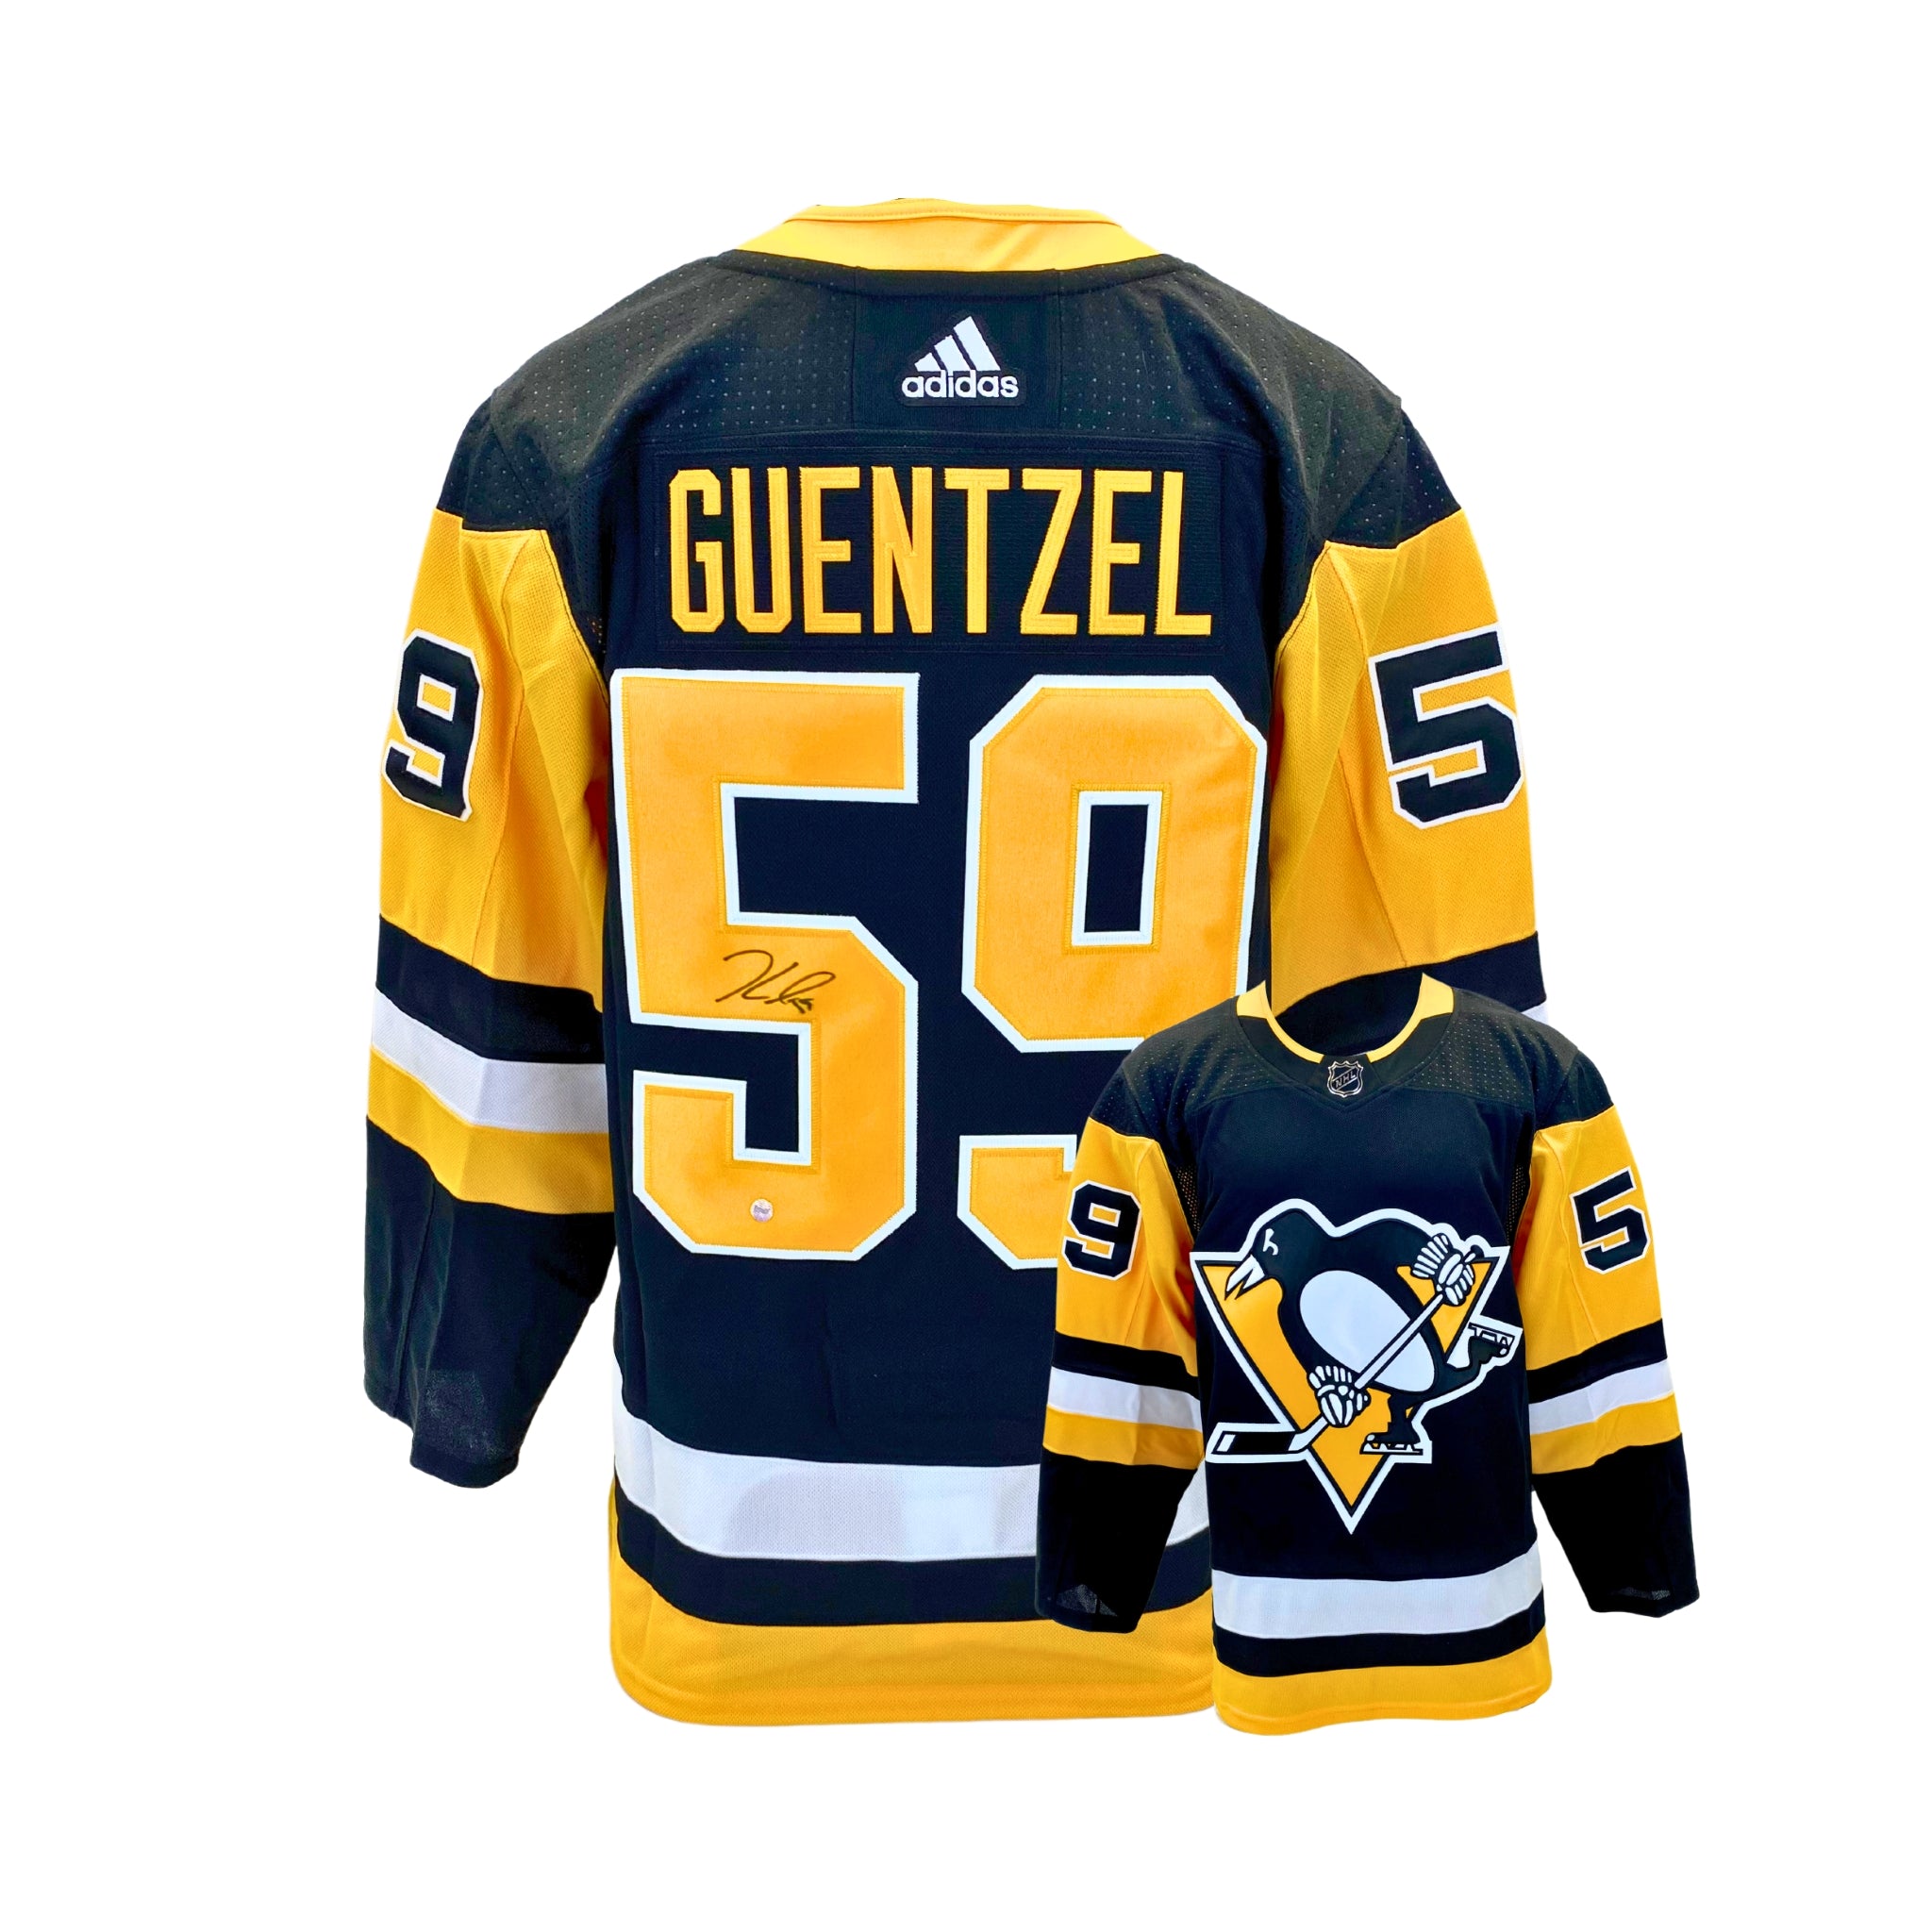 Jake Guentzel Pittsburgh Penguins Autographed White Adidas Authentic Jersey